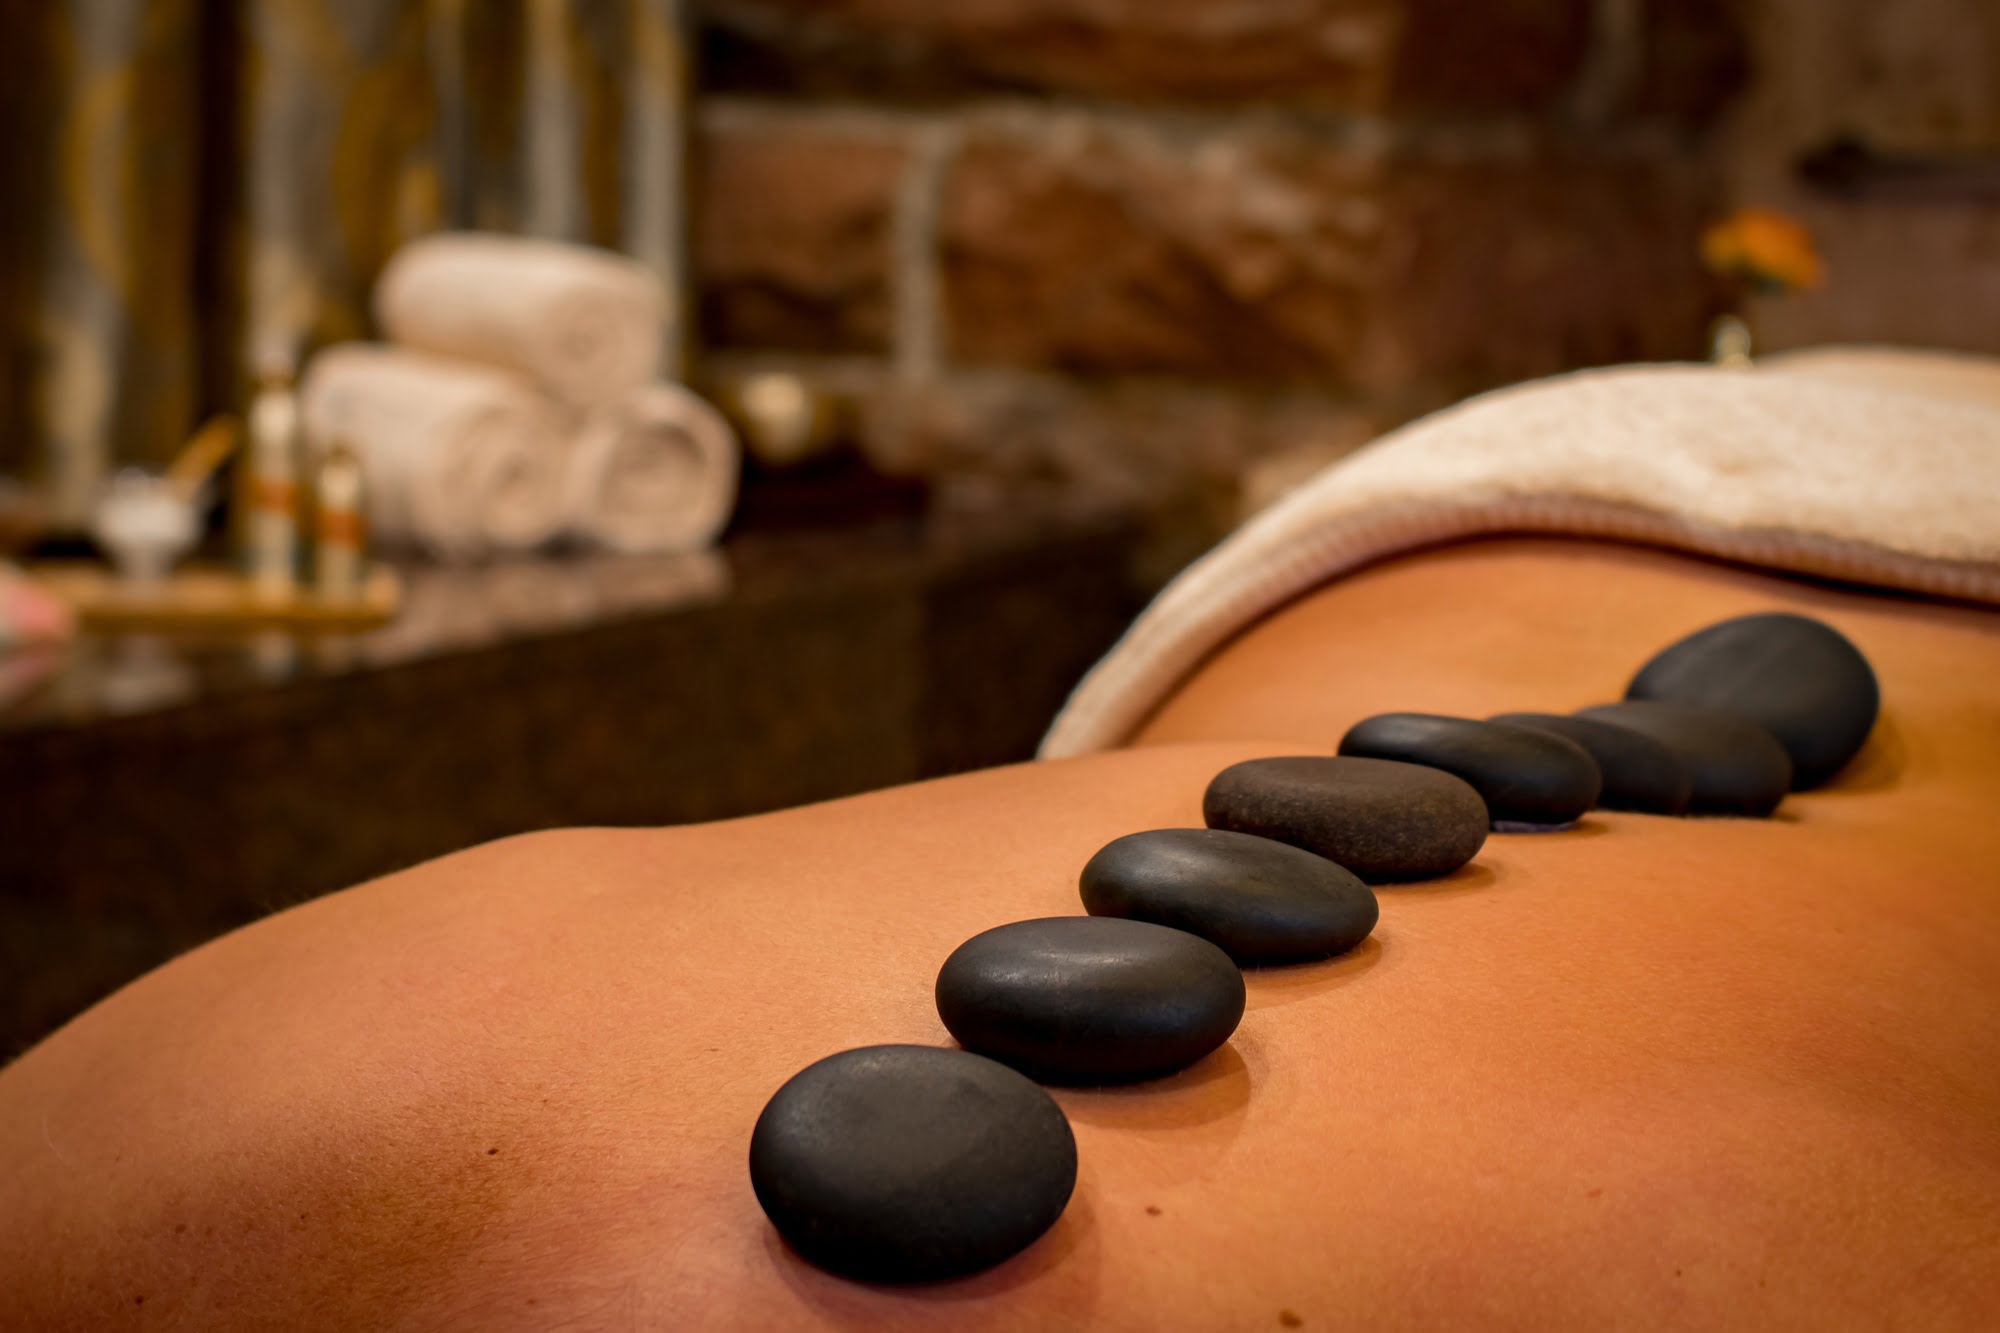 Finding the right spa for a specific treatment requires knowing your options. This guide explains everything to know when selecting a health spa.